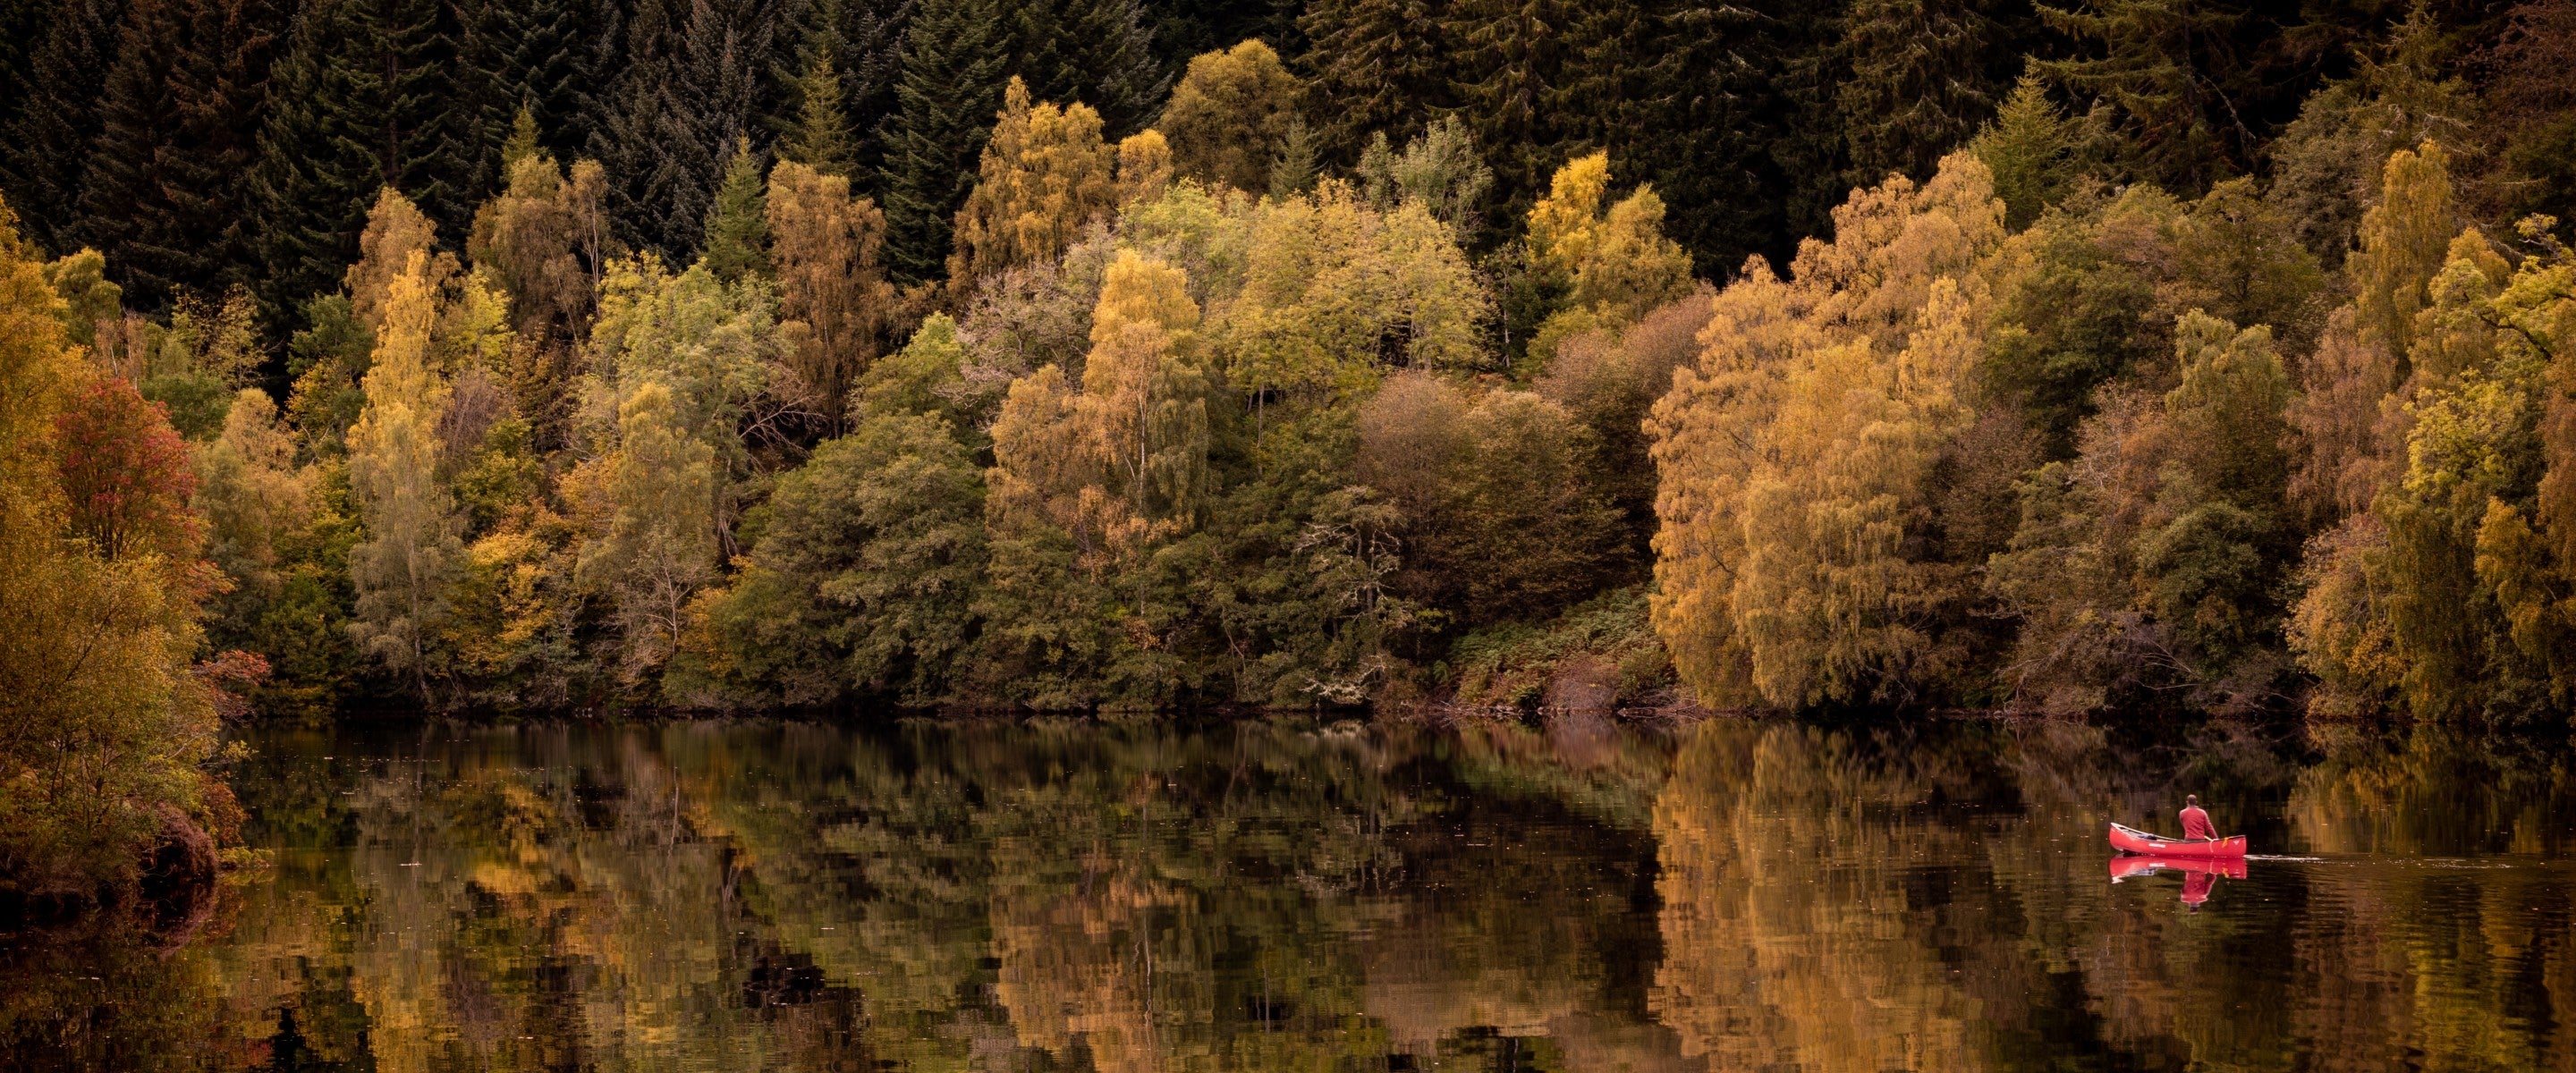 Banner landscape shot of a calm Scottish highland loch with a canoeist and spectacular forests behind, the trees reflected in the water